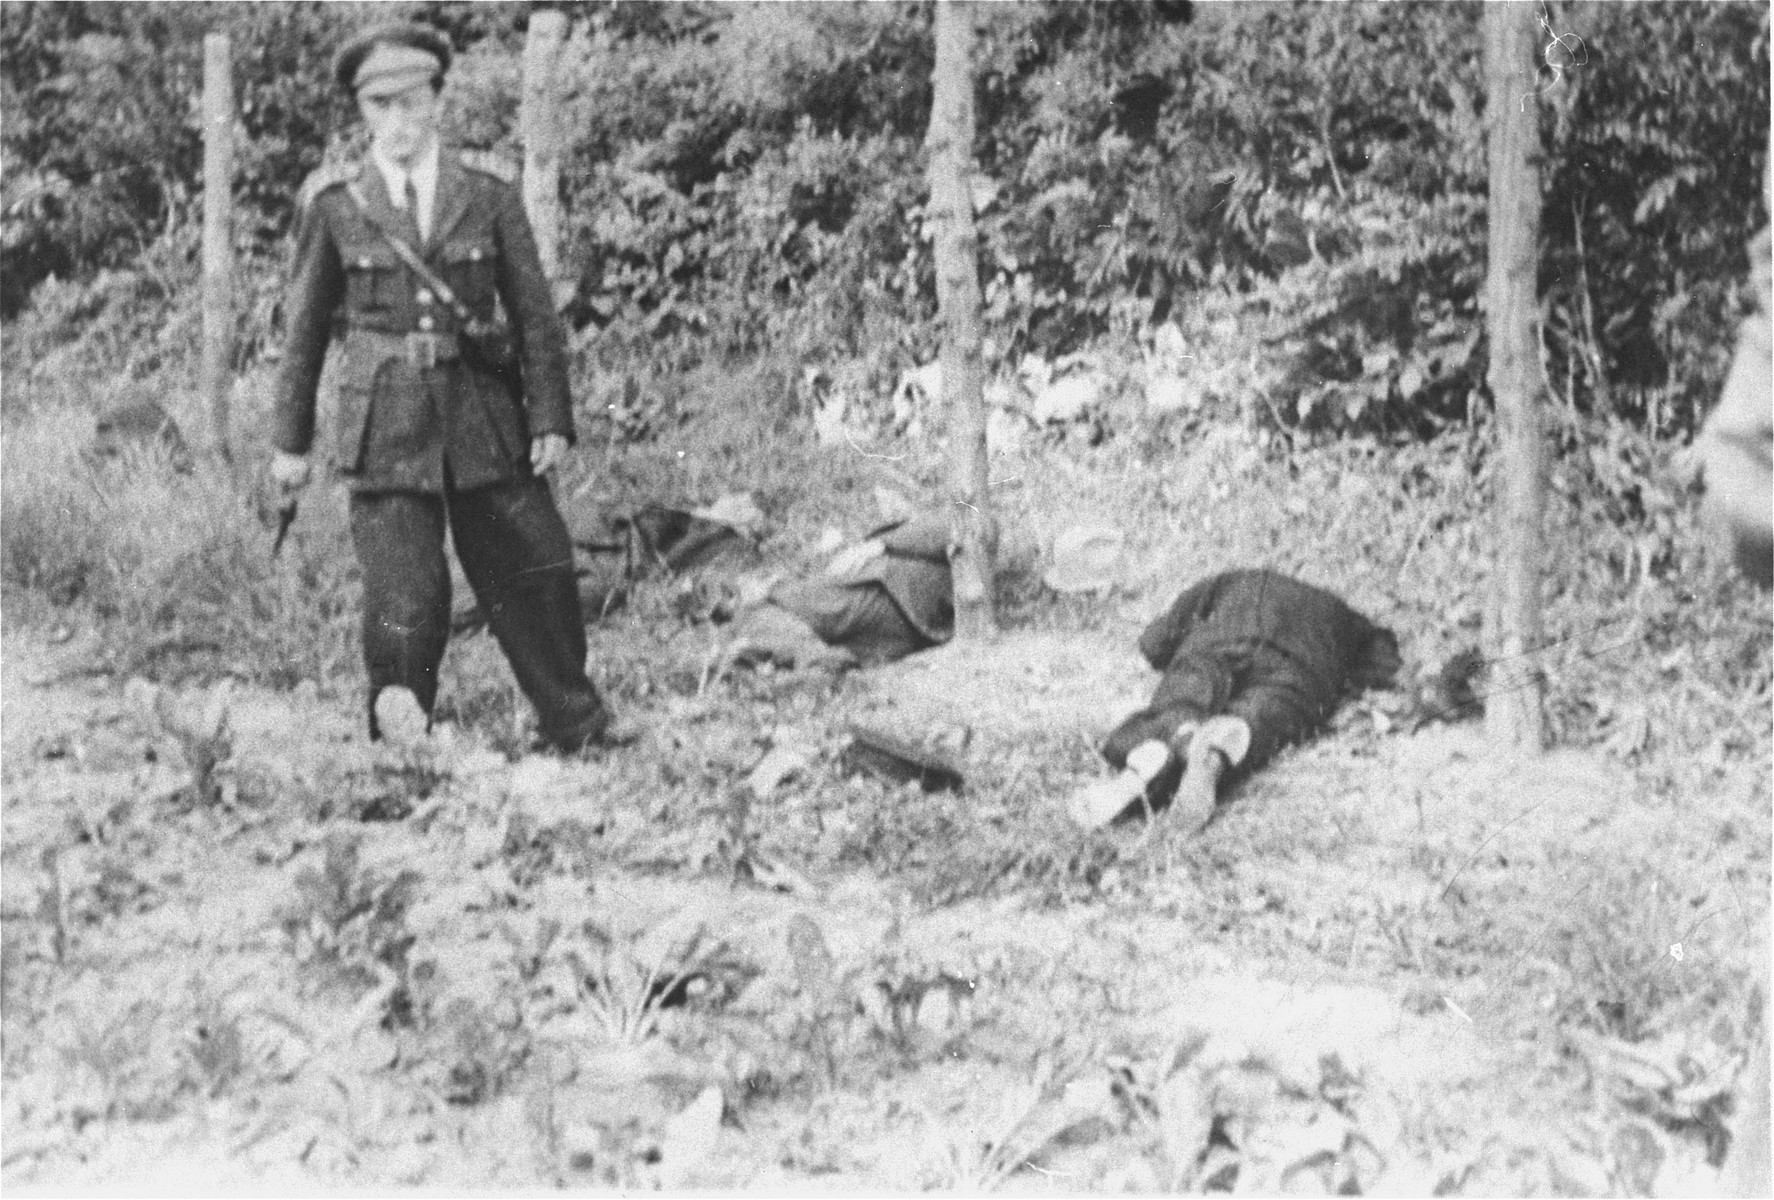 The execution of Marshall Ion Antonescu, former dictator of Romania (1940-1944) at the Fort Jilava prison in a suburb of Bucharest.  

He was executed along with three others: Mihai Antonescu (the former vice-president and minister of foreign affairs), Gheorge Alexianu (former governor of Transnistria), and General C.Z. Vasiliu (former deputy minister of interior affairs and head of the gendarmerie).